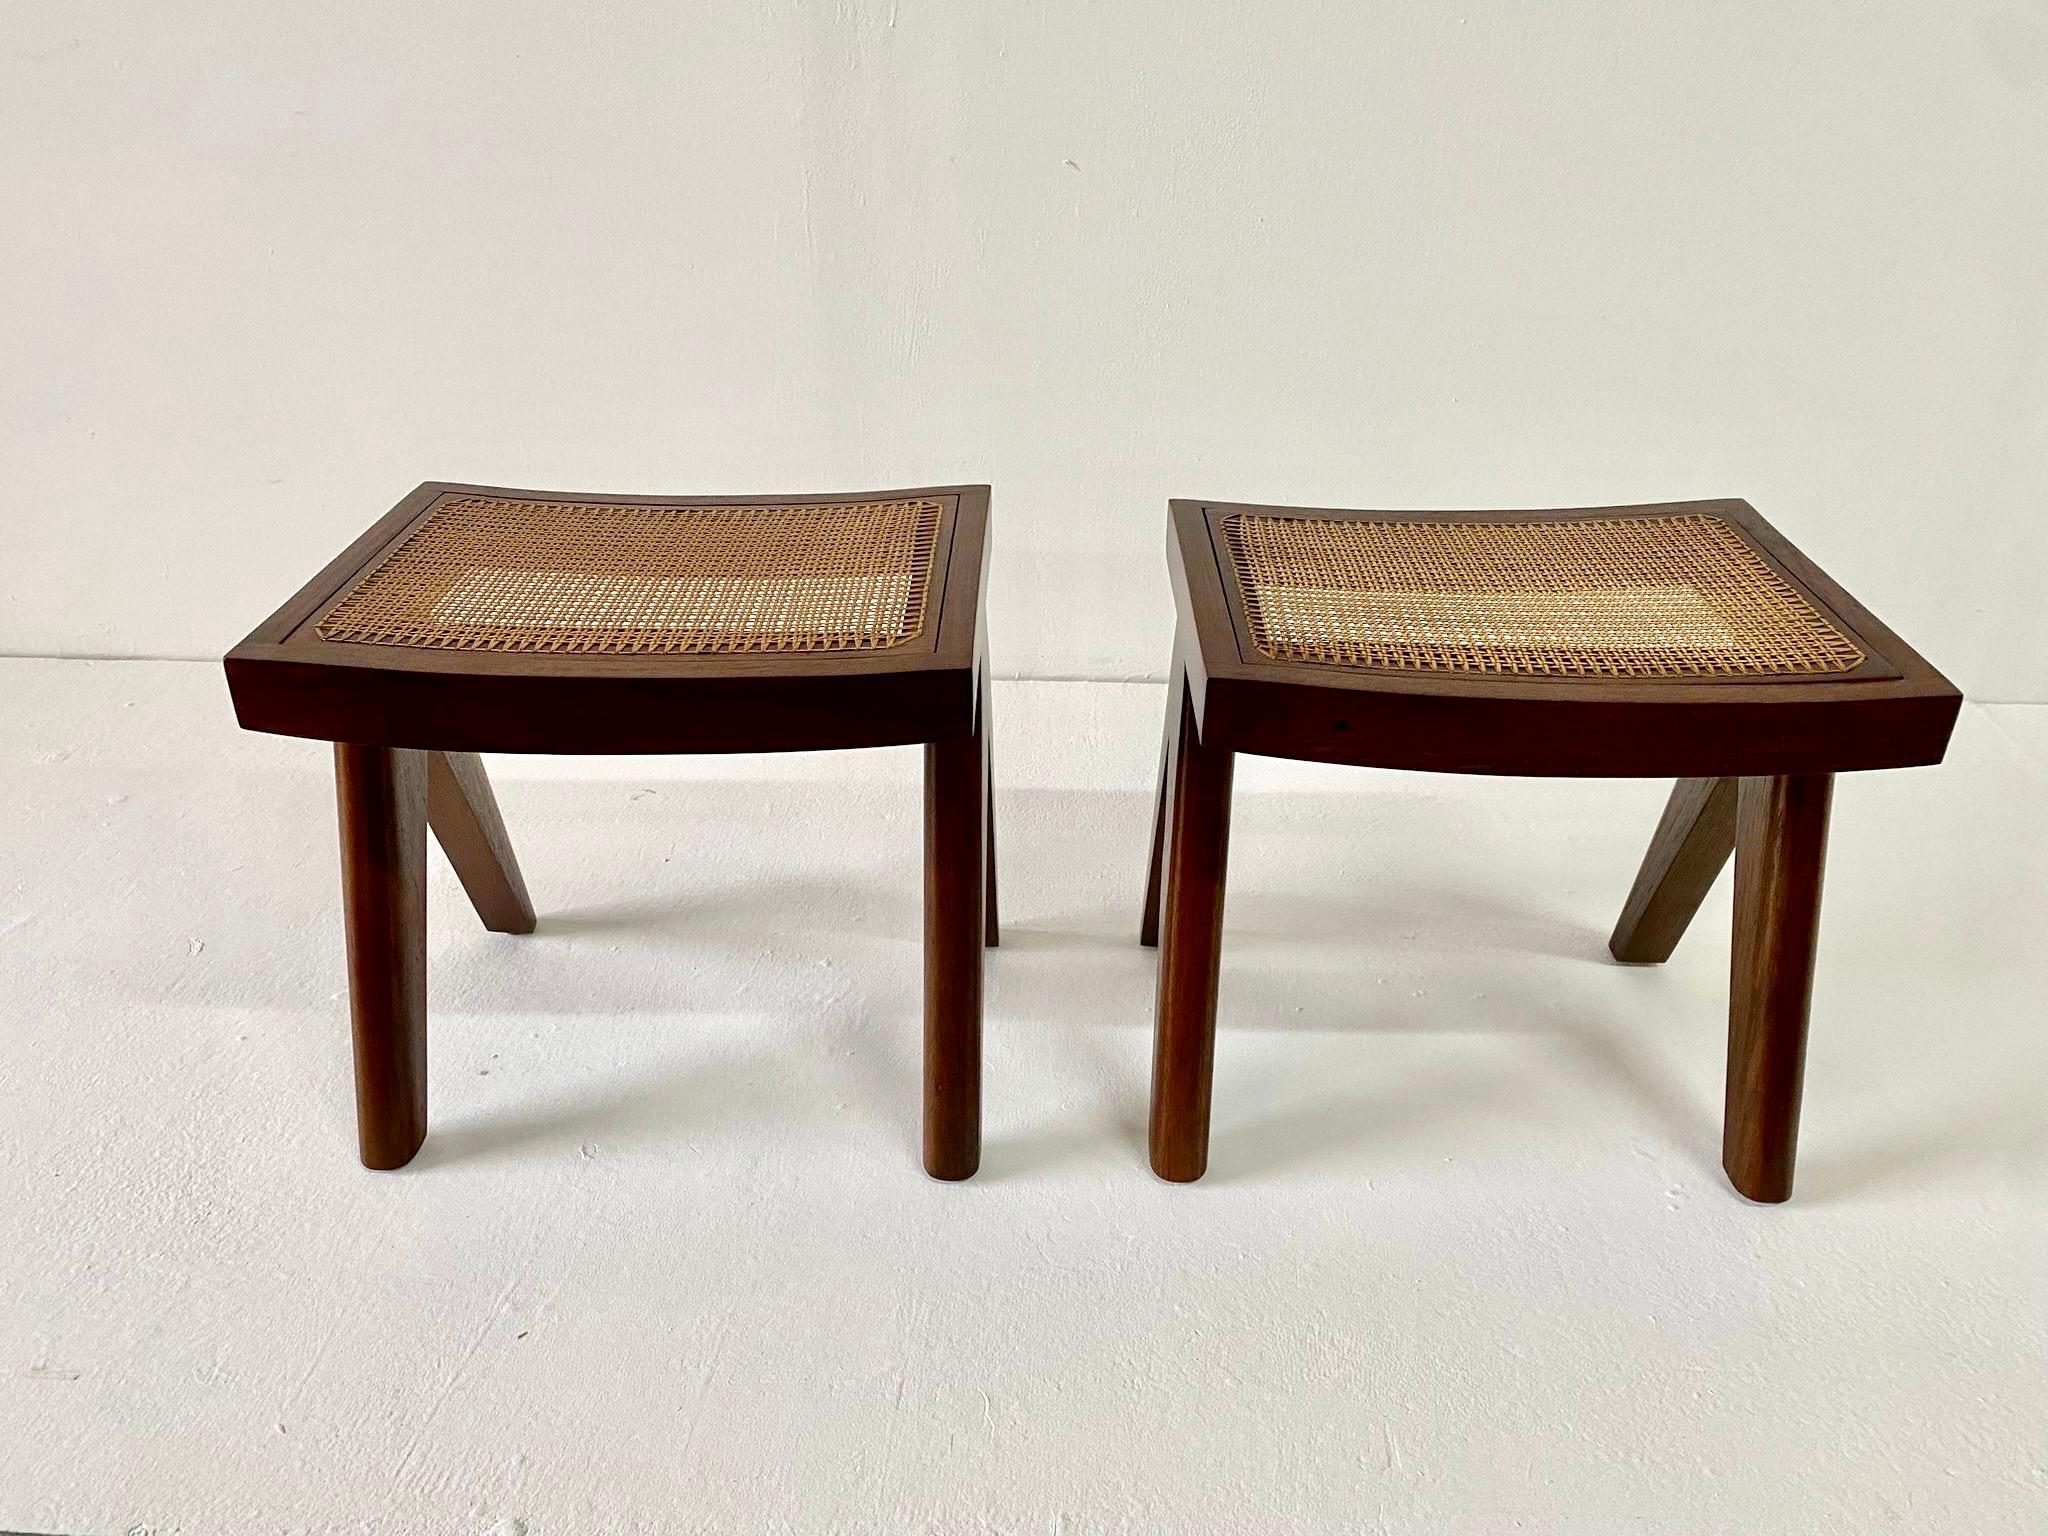 Studio Made Heavy Teak Stools - Manner of Jeanneret (2 Pairs Available) For Sale 1